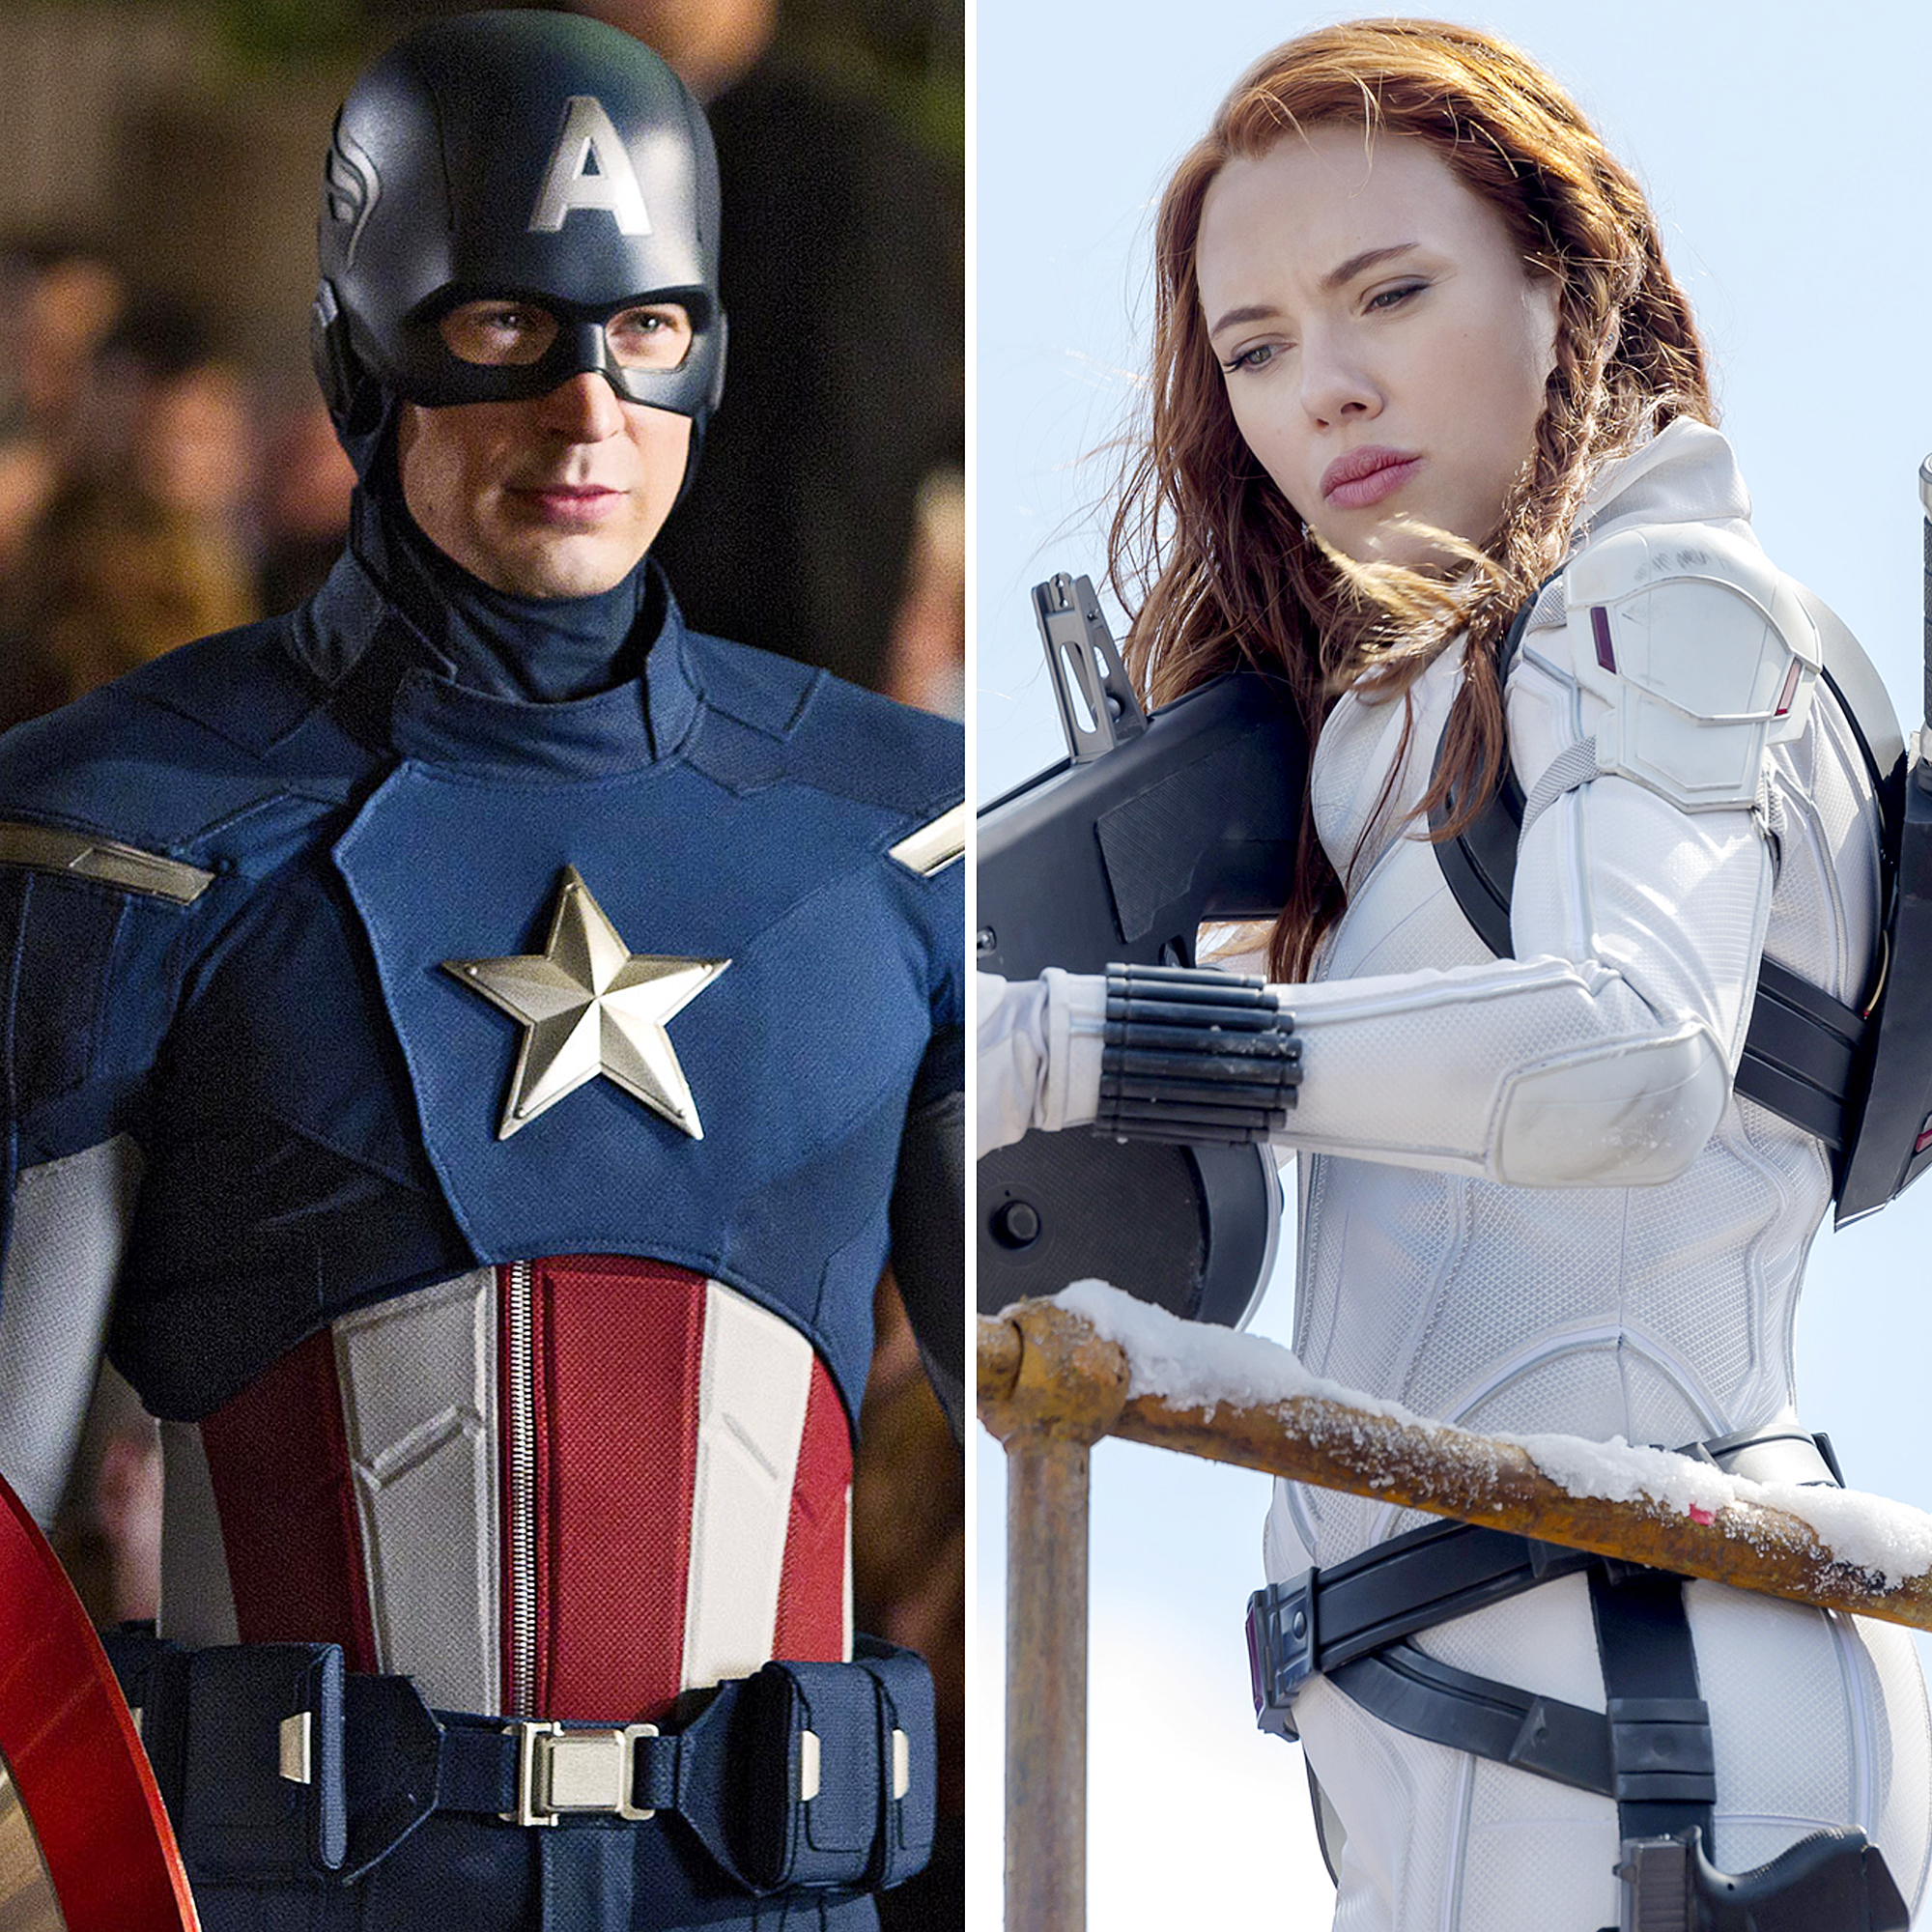 19 Actors Who Were Almost Cast as Characters in the Marvel